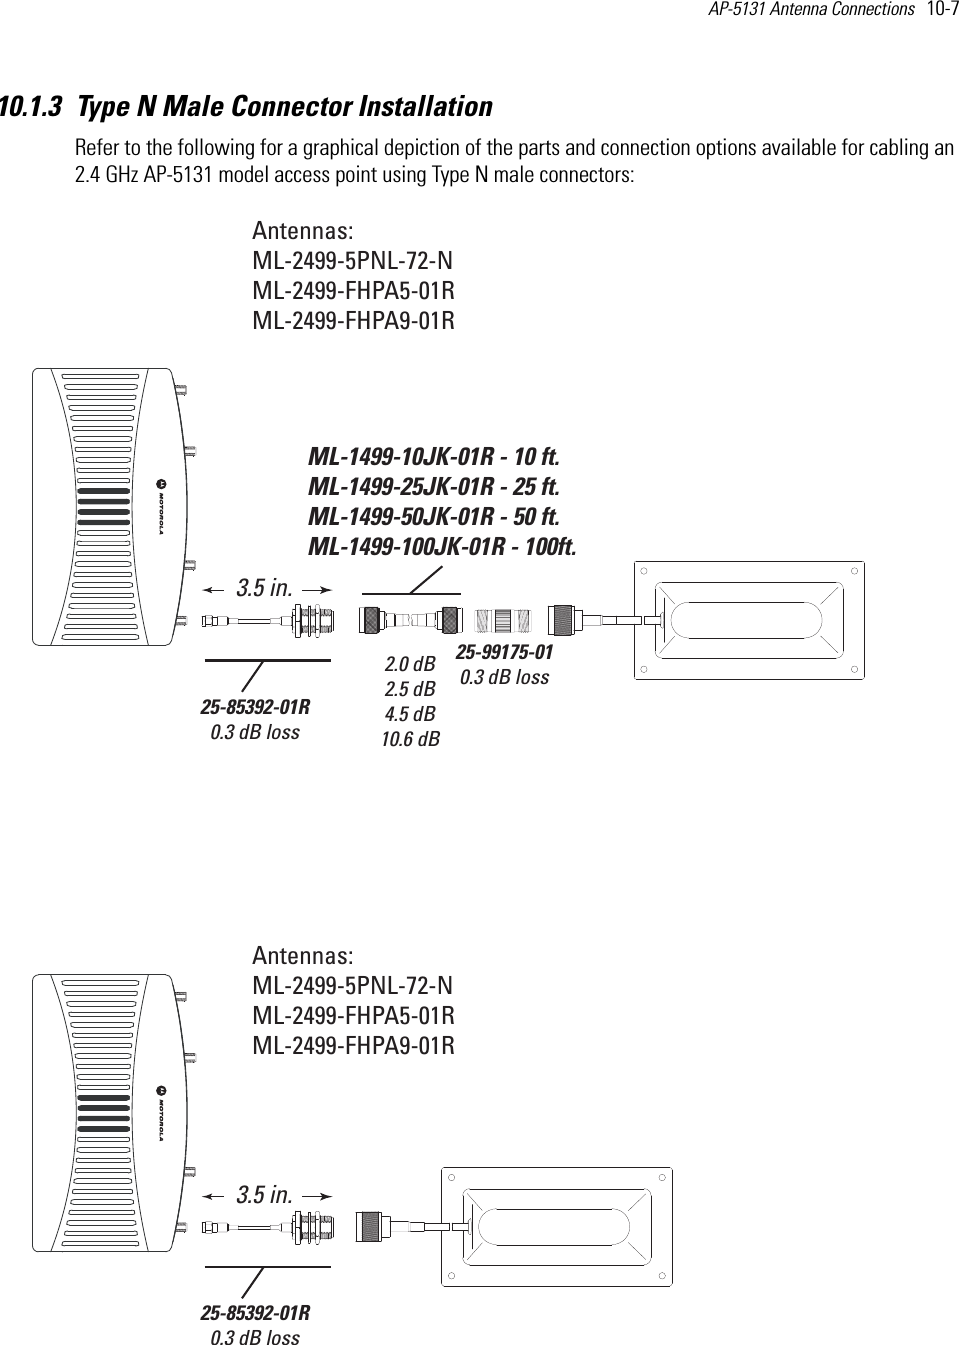 AP-5131 Antenna Connections   10-7 10.1.3 Type N Male Connector InstallationRefer to the following for a graphical depiction of the parts and connection options available for cabling an 2.4 GHz AP-5131 model access point using Type N male connectors: Antennas:ML-2499-5PNL-72-NML-2499-FHPA5-01RML-2499-FHPA9-01RAntennas:ML-2499-5PNL-72-NML-2499-FHPA5-01RML-2499-FHPA9-01R25-85392-01R0.3 dB loss3.5 in.25-85392-01R0.3 dB loss3.5 in.ML-1499-10JK-01R - 10 ft.ML-1499-25JK-01R - 25 ft.ML-1499-50JK-01R - 50 ft.ML-1499-100JK-01R - 100ft. 2.0 dB2.5 dB4.5 dB10.6 dB25-99175-010.3 dB loss